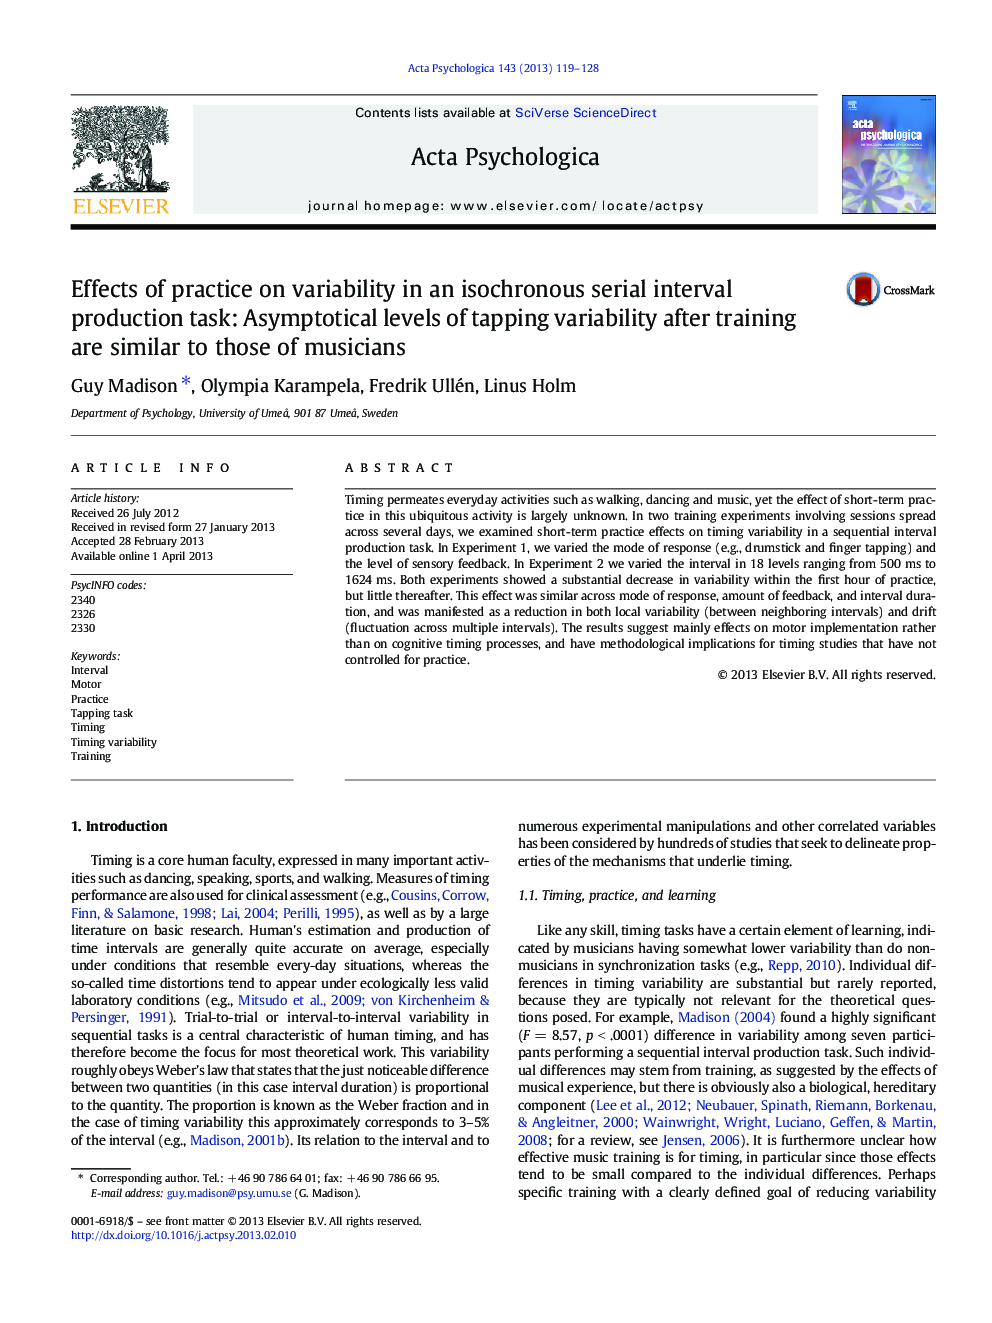 Effects of practice on variability in an isochronous serial interval production task: Asymptotical levels of tapping variability after training are similar to those of musicians